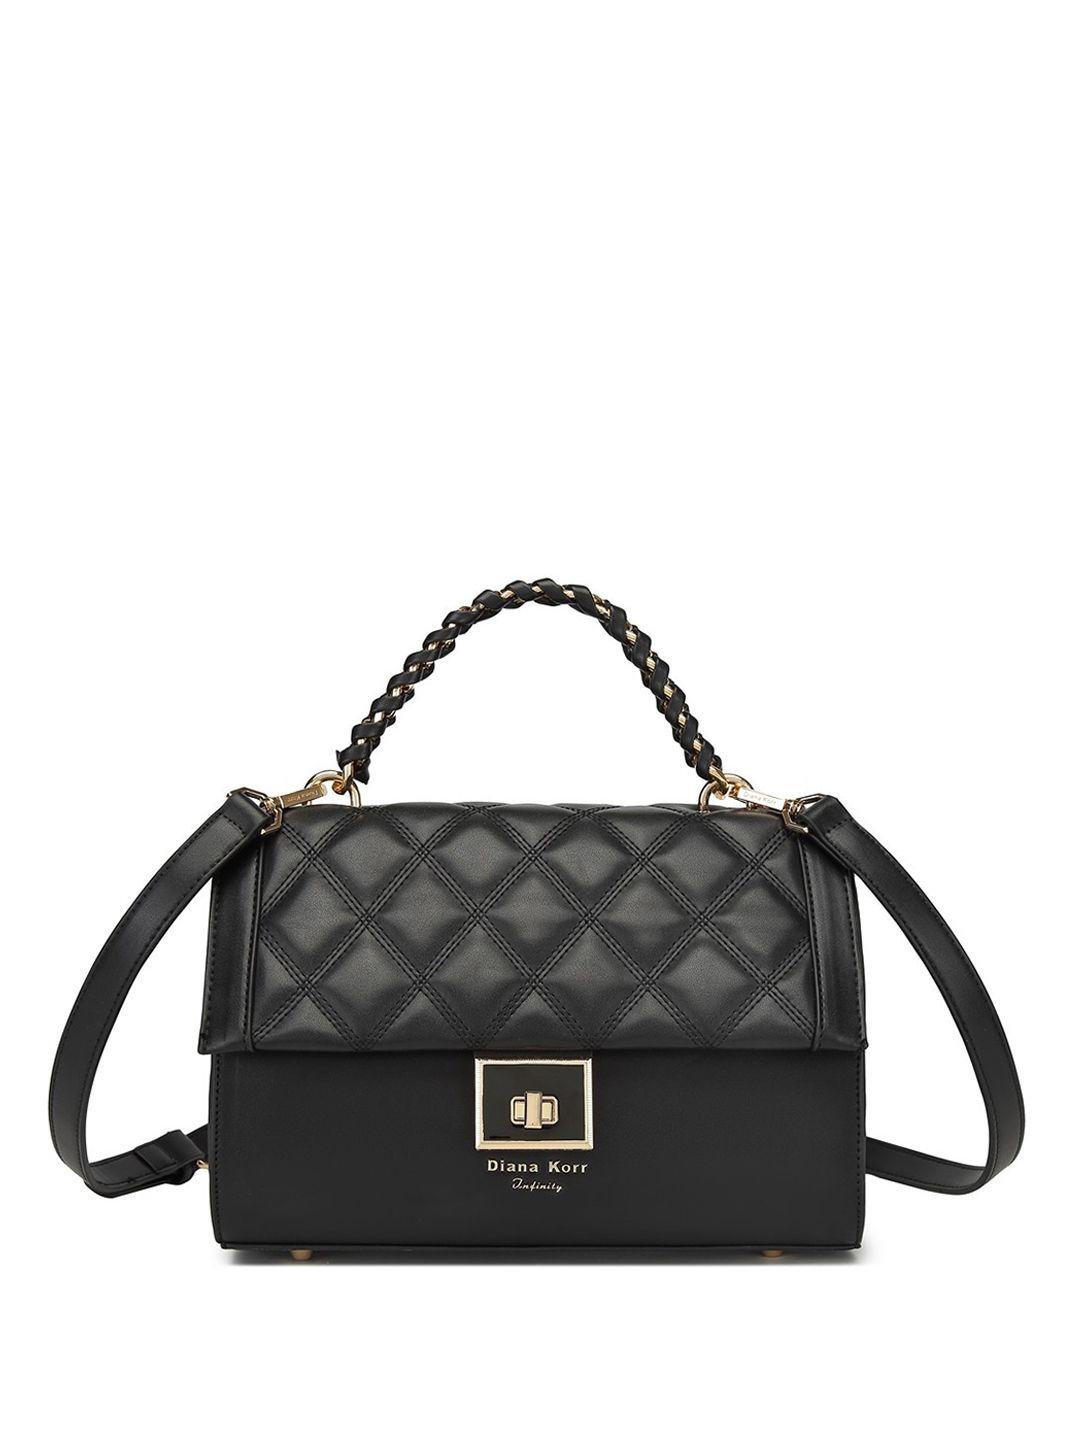 diana korr structured handheld bag with quilted